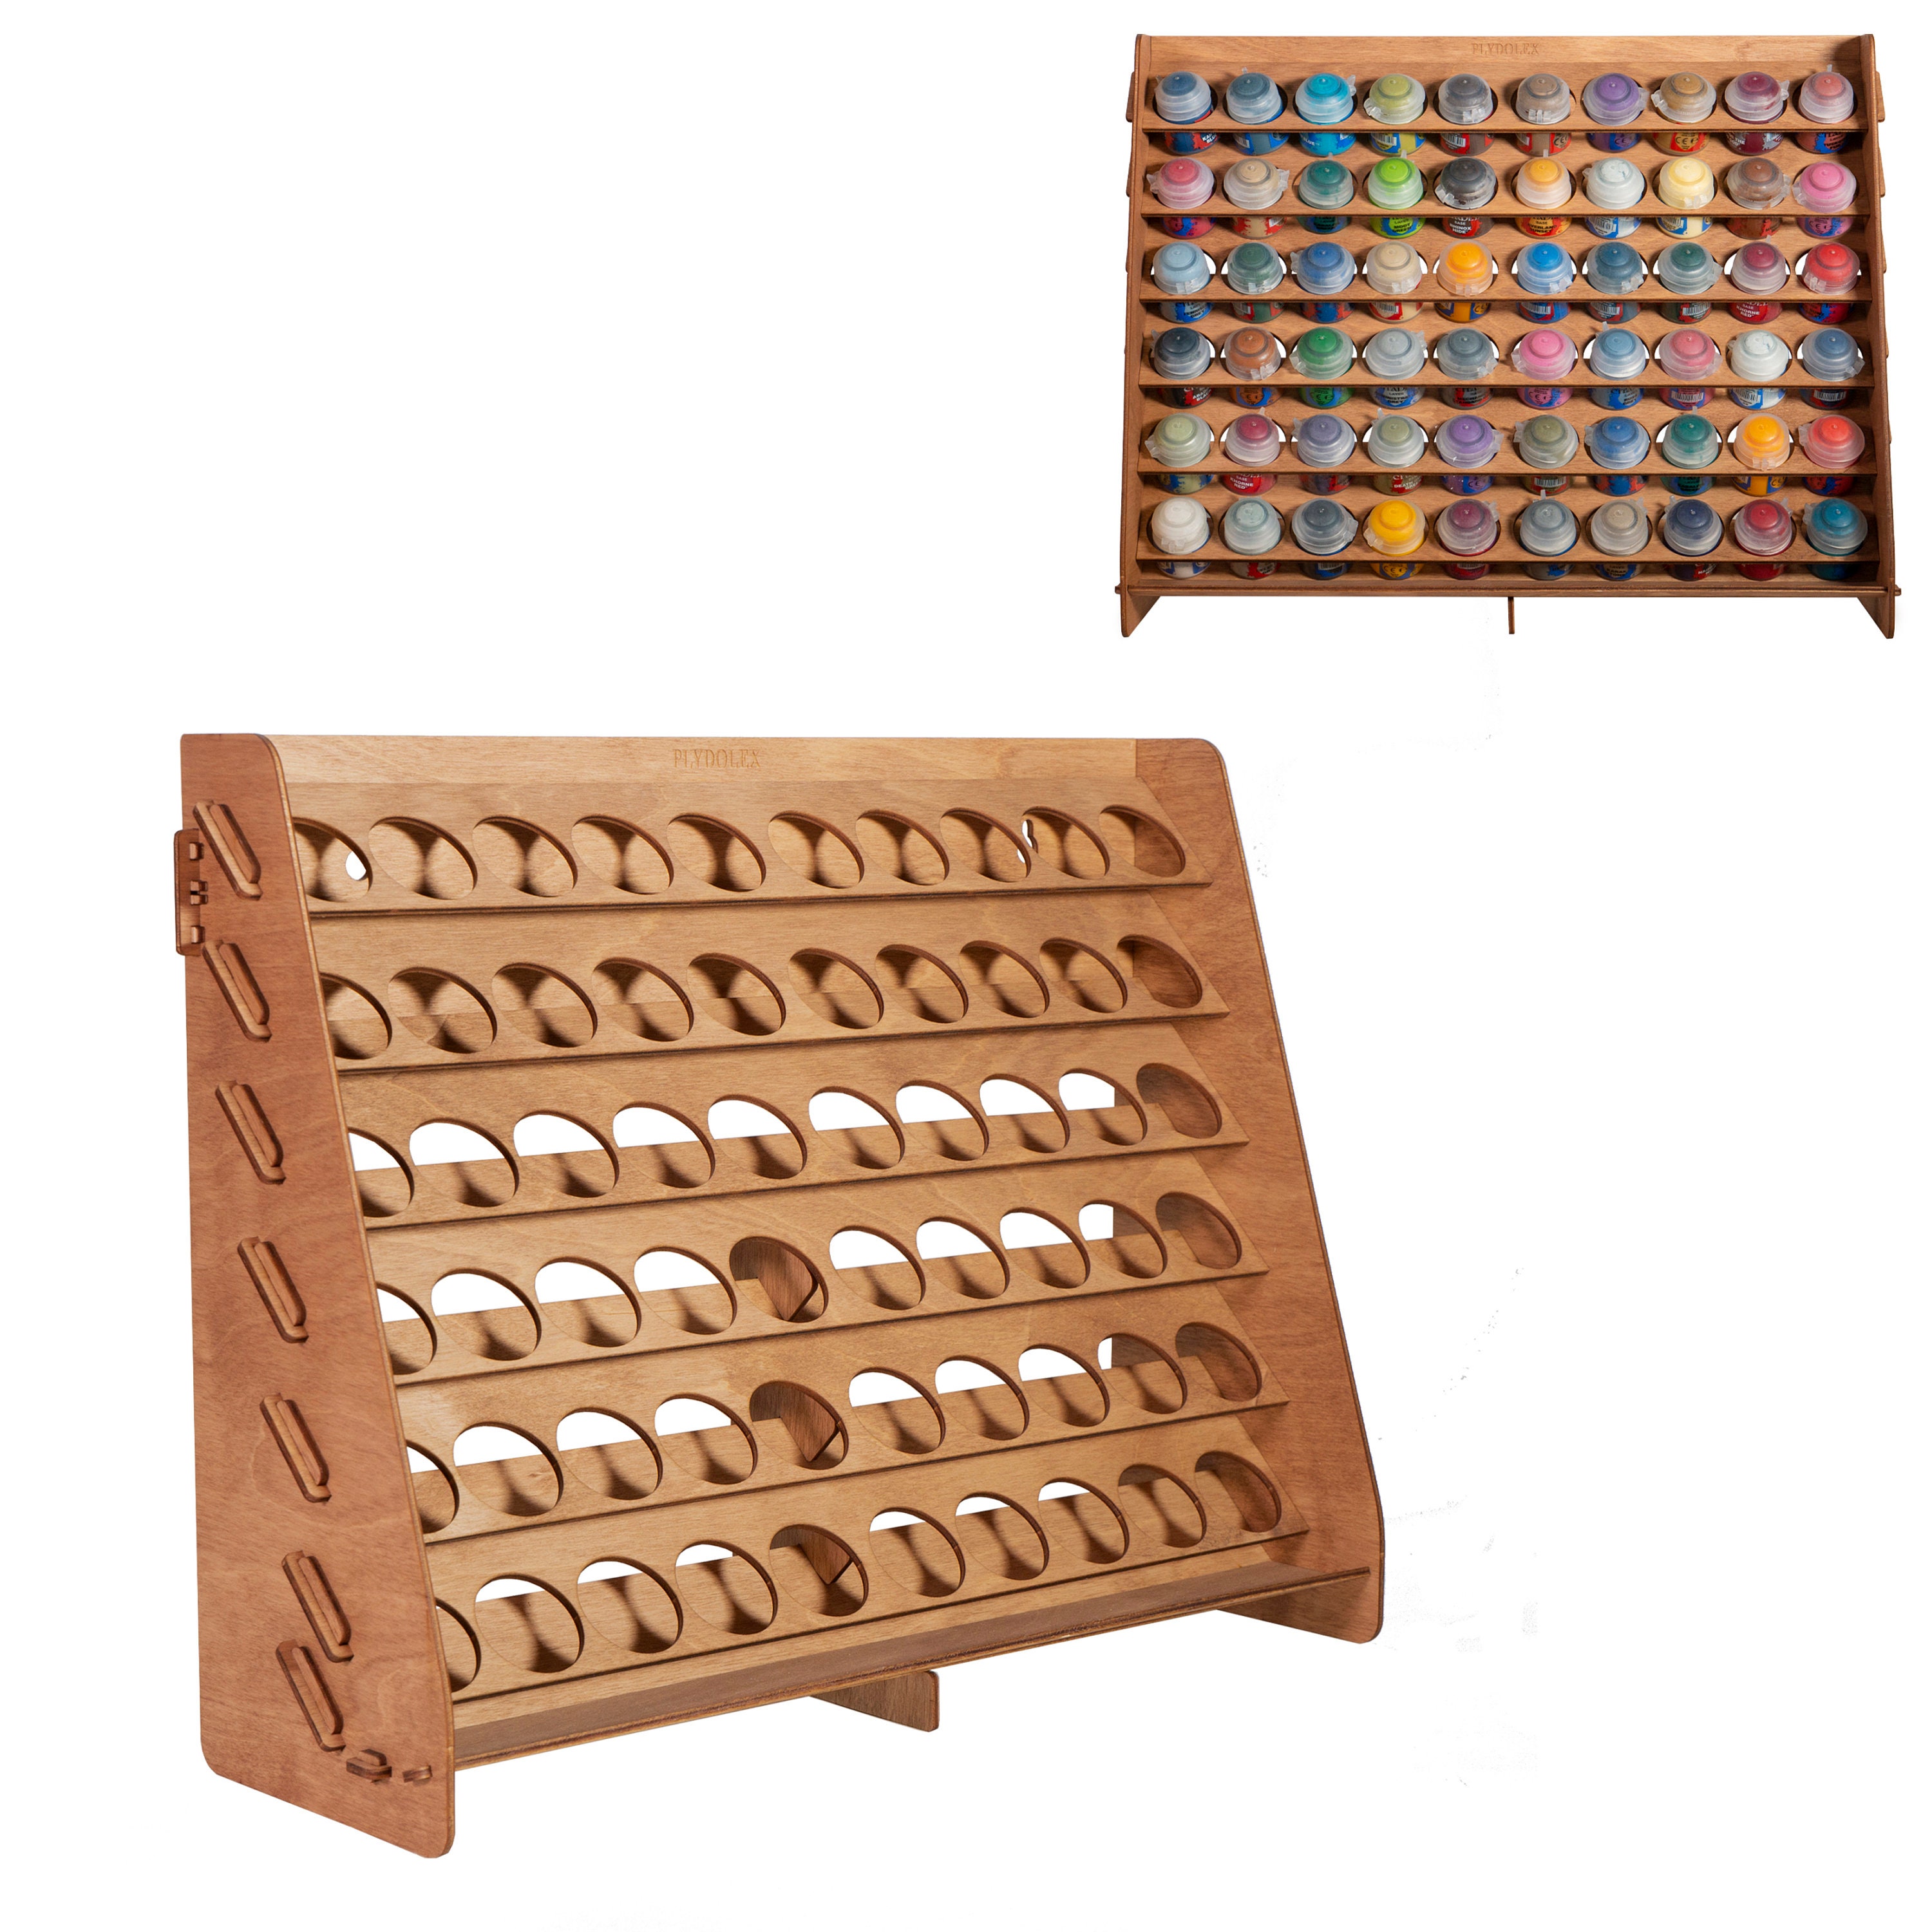 Citadel Paint Rack Organizer With 60 Holes for Miniature Paint Set  Wall-mounted Wooden Craft Paint Storage Rack Craft Paint Holder Rack -   Israel